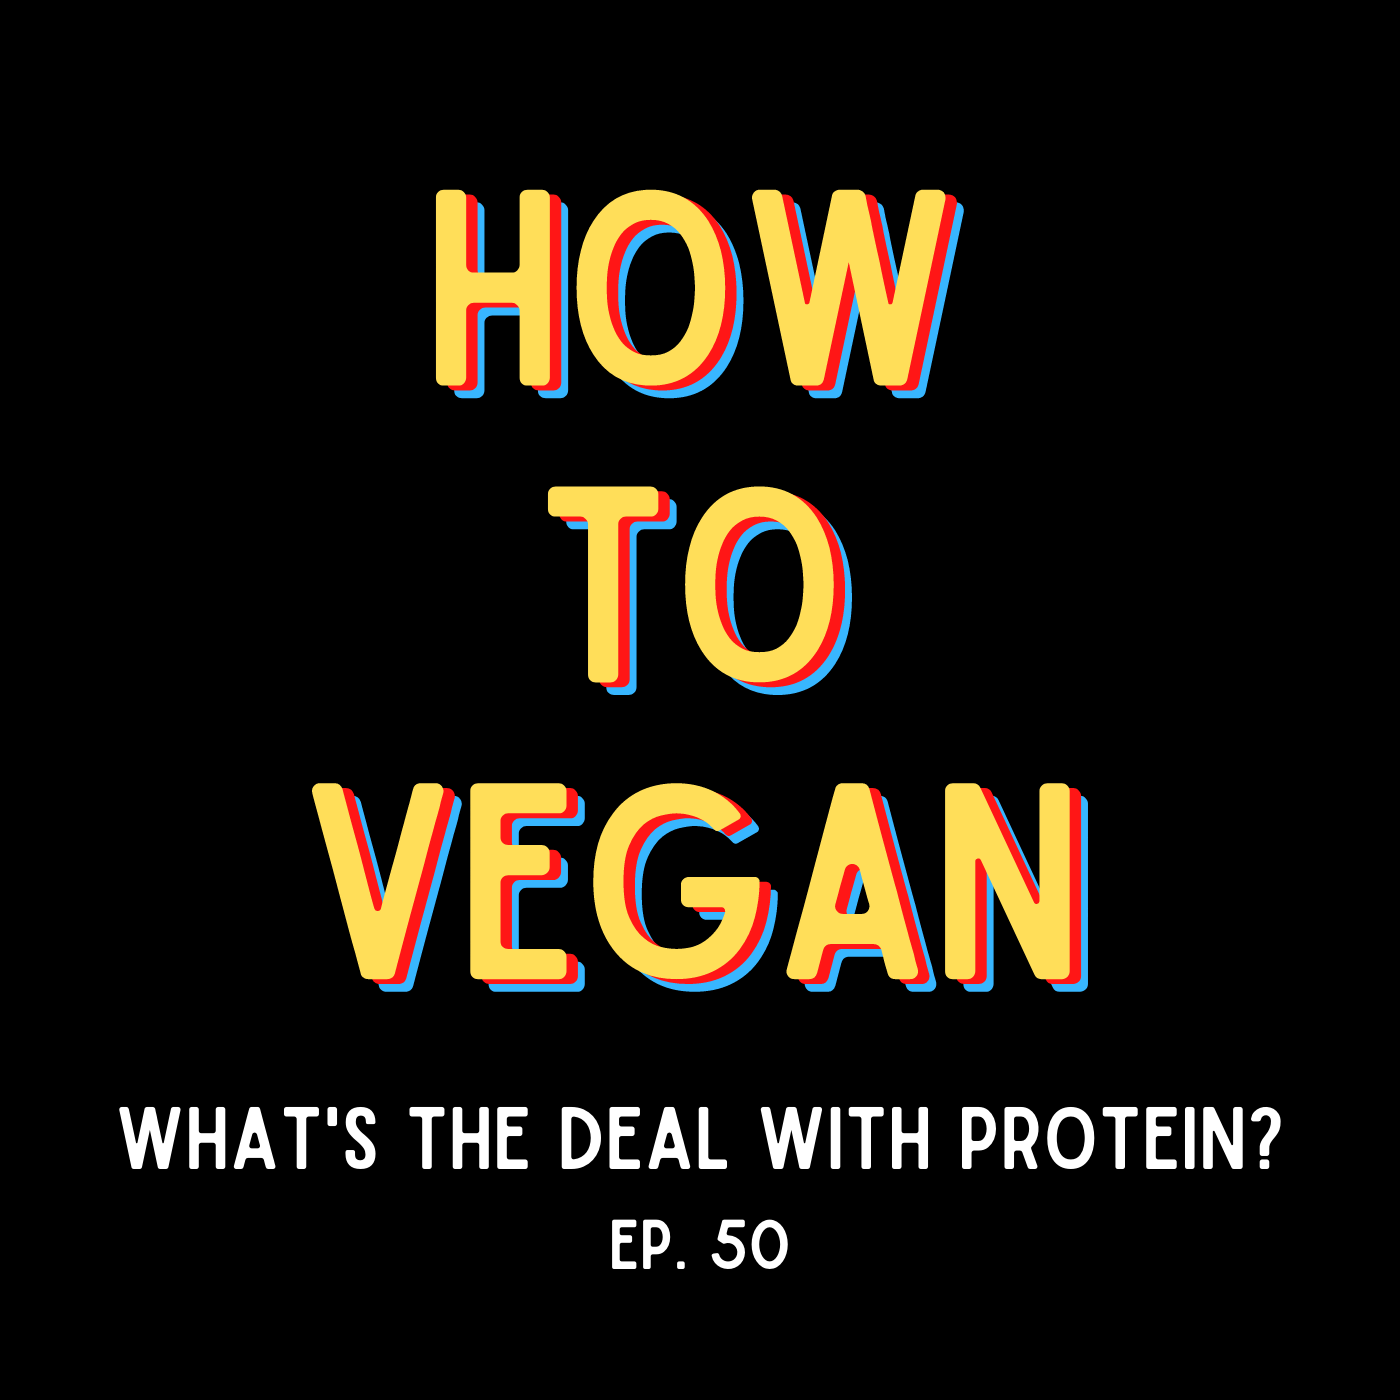 What's The Deal With Protein?